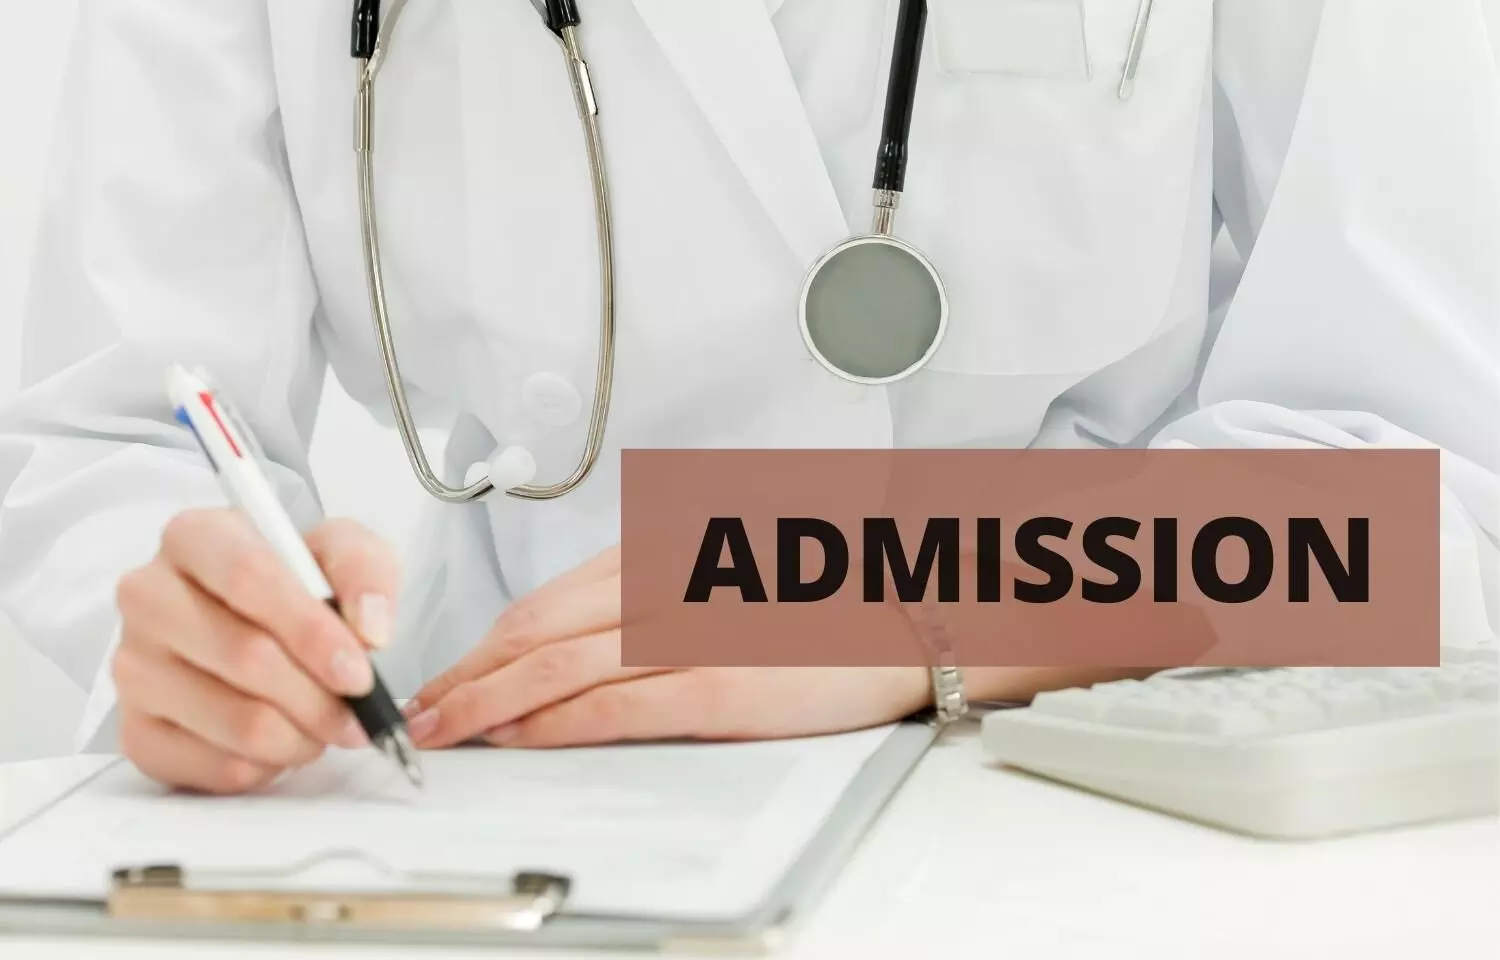 Mohali Medical College to Commence First MBBS Batch from January, February 2022